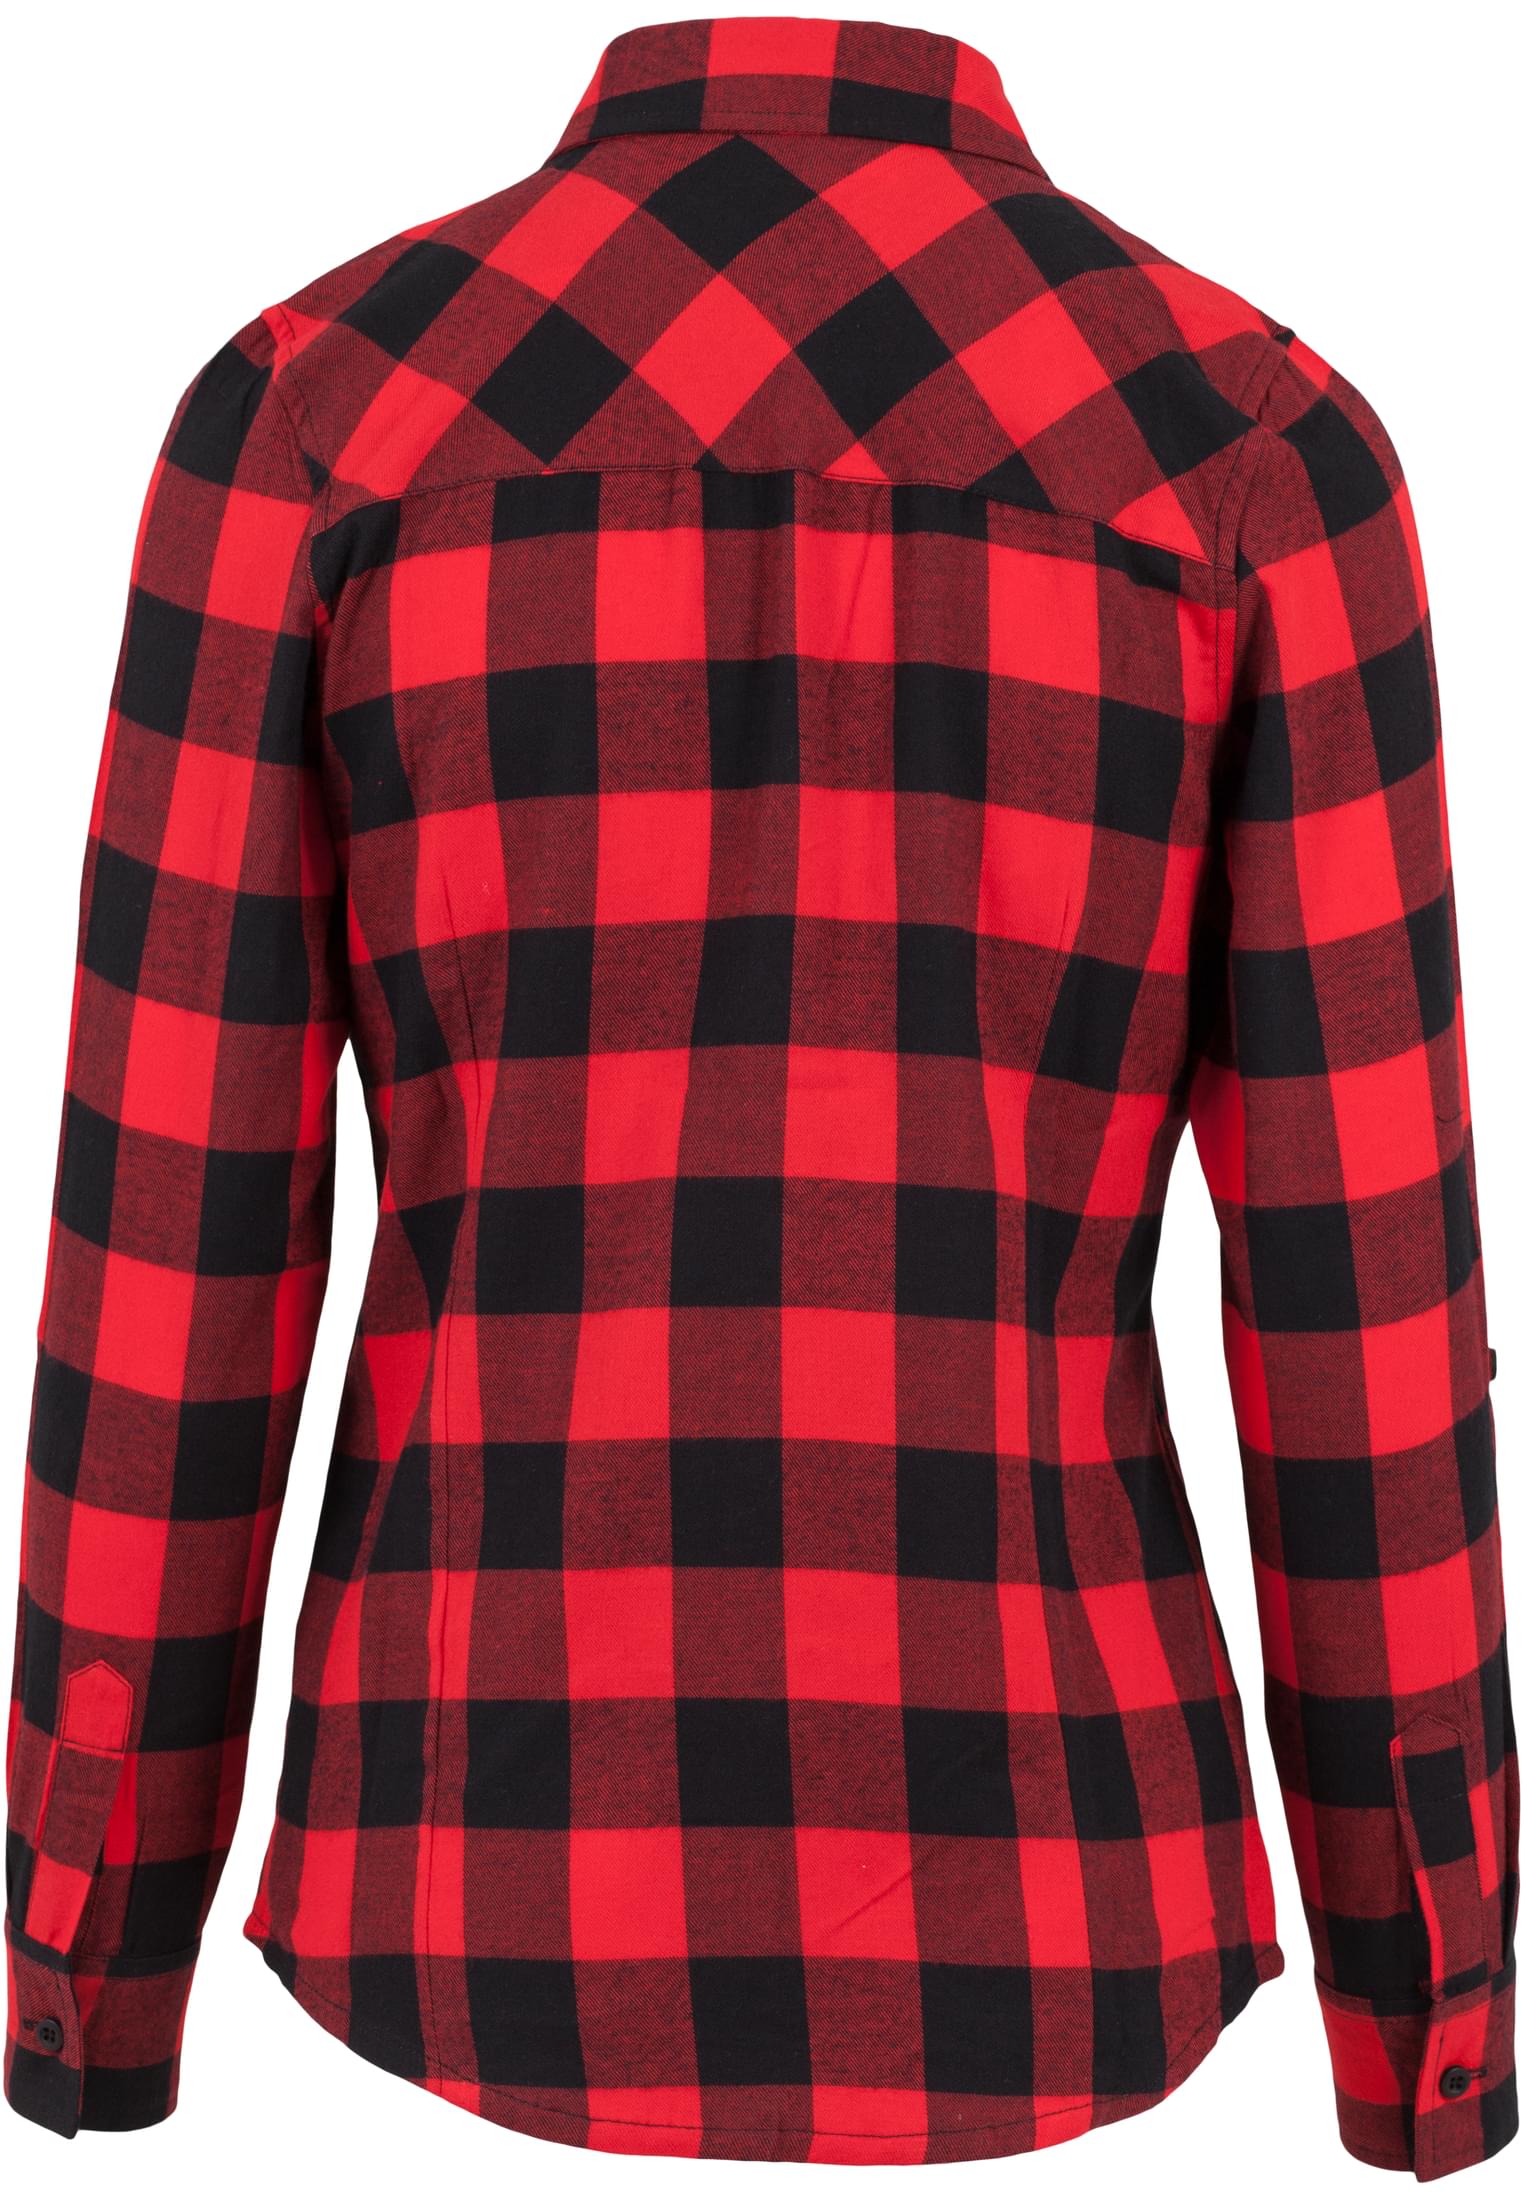 Damen Ladies Turnup Checked Flanell Shirt in Farbe blk/red